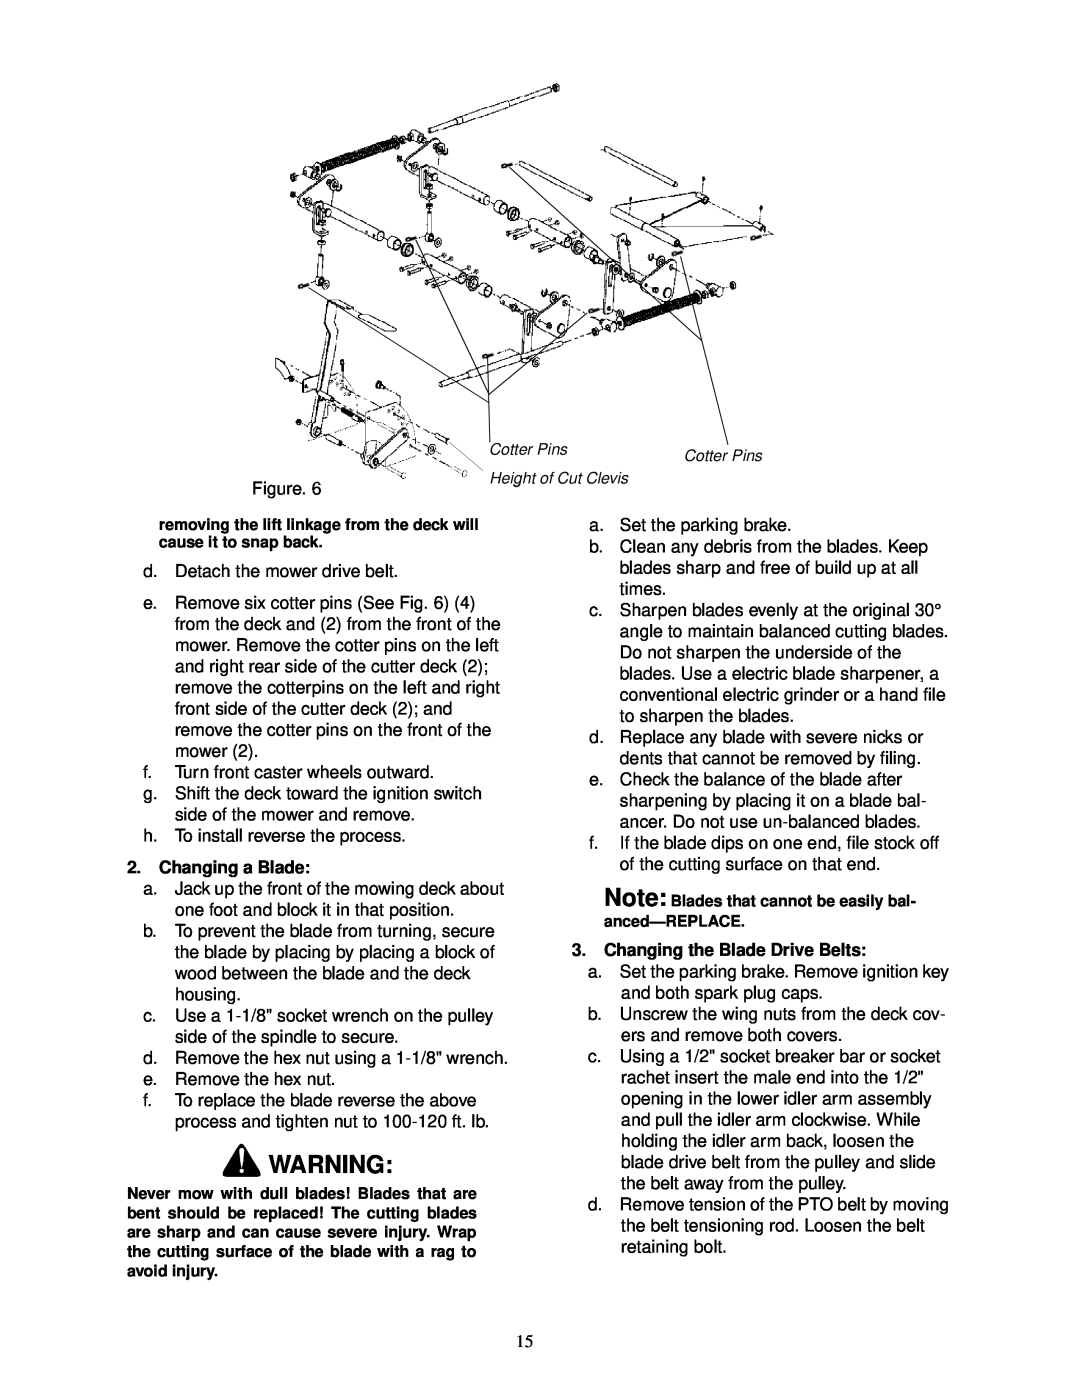 MTD 18HP service manual Changing a Blade, Changing the Blade Drive Belts 